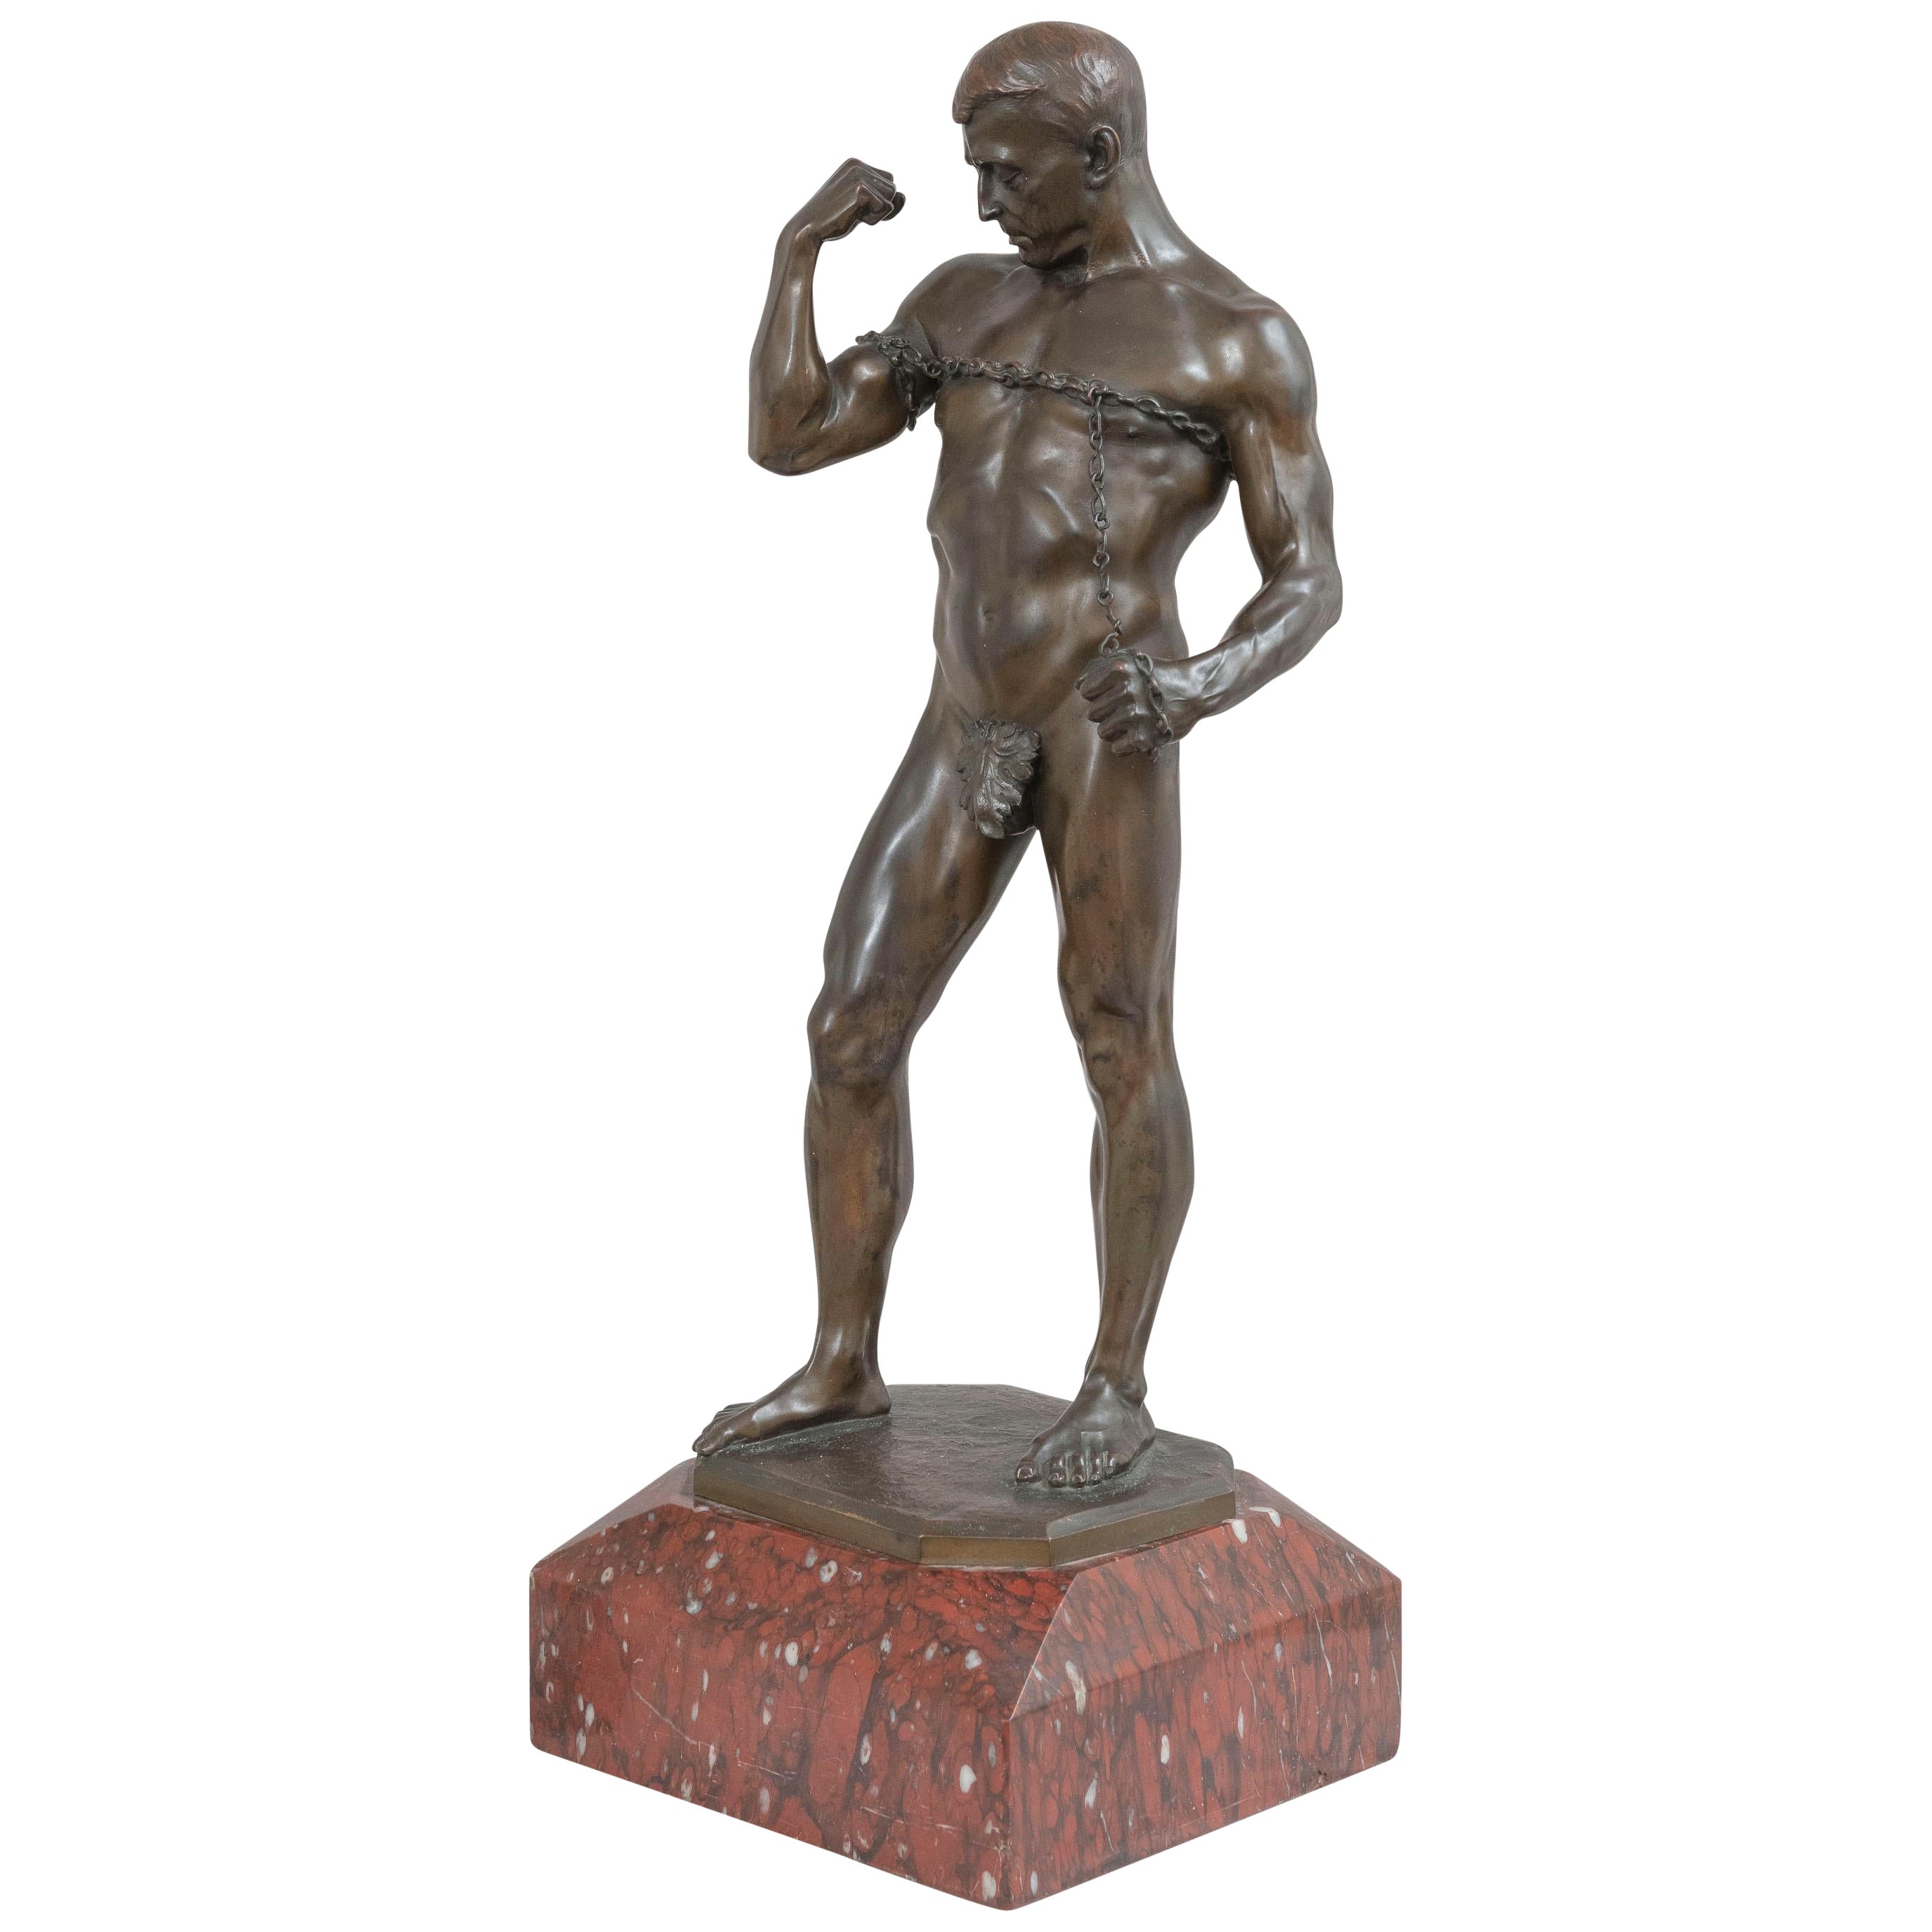 German Bronze Figure of a Nude Male Strongman Breaking out of Chains, ca. 1895